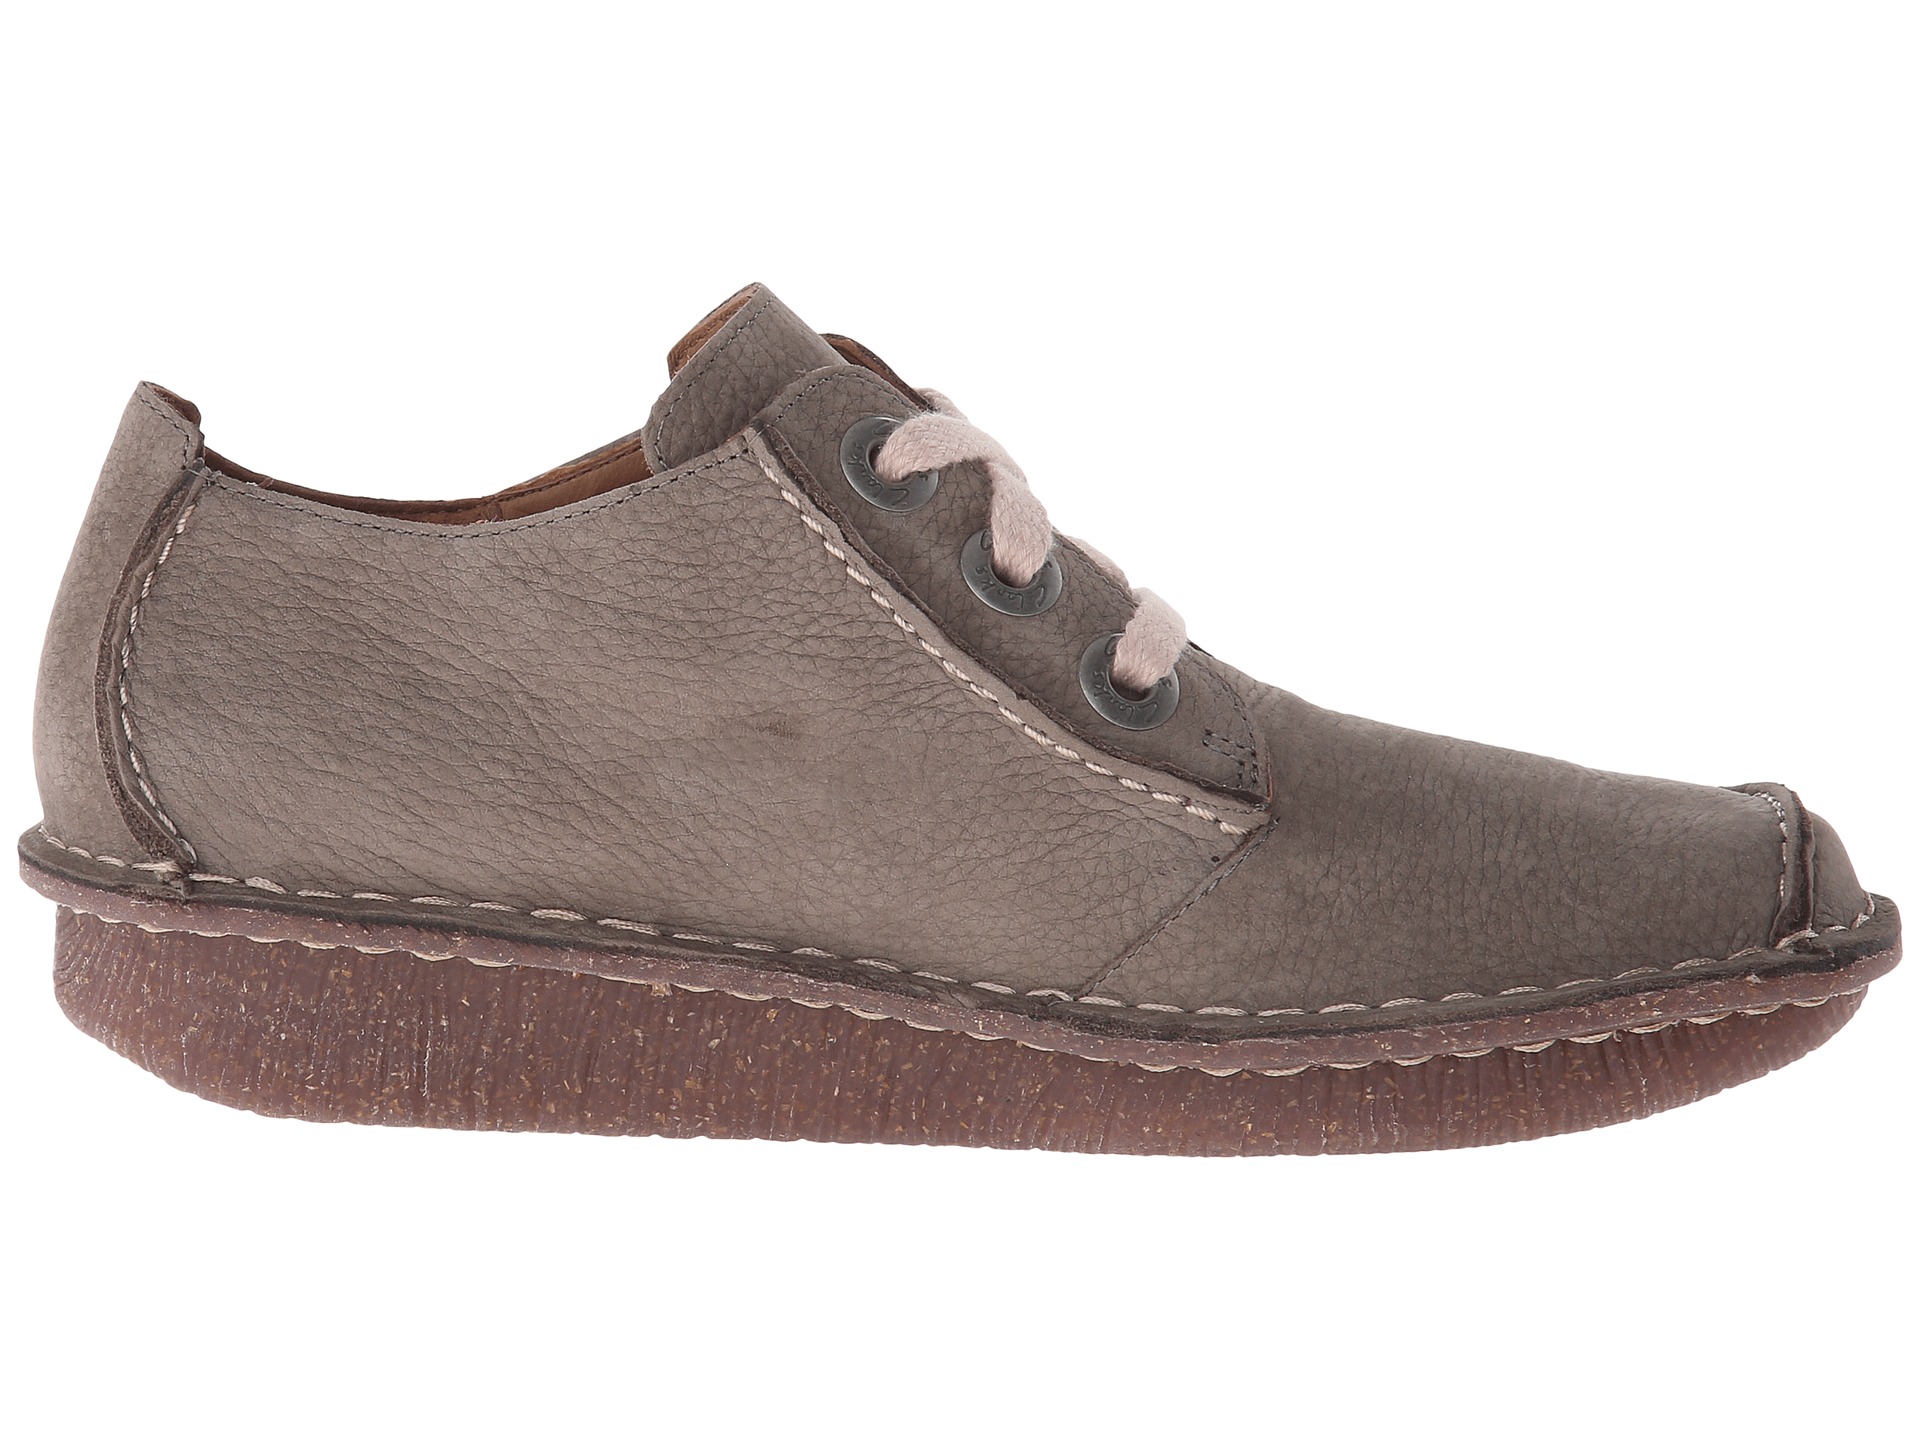 Clarks Funny Dream Brown Leather - Zappos.com Free Shipping BOTH Ways